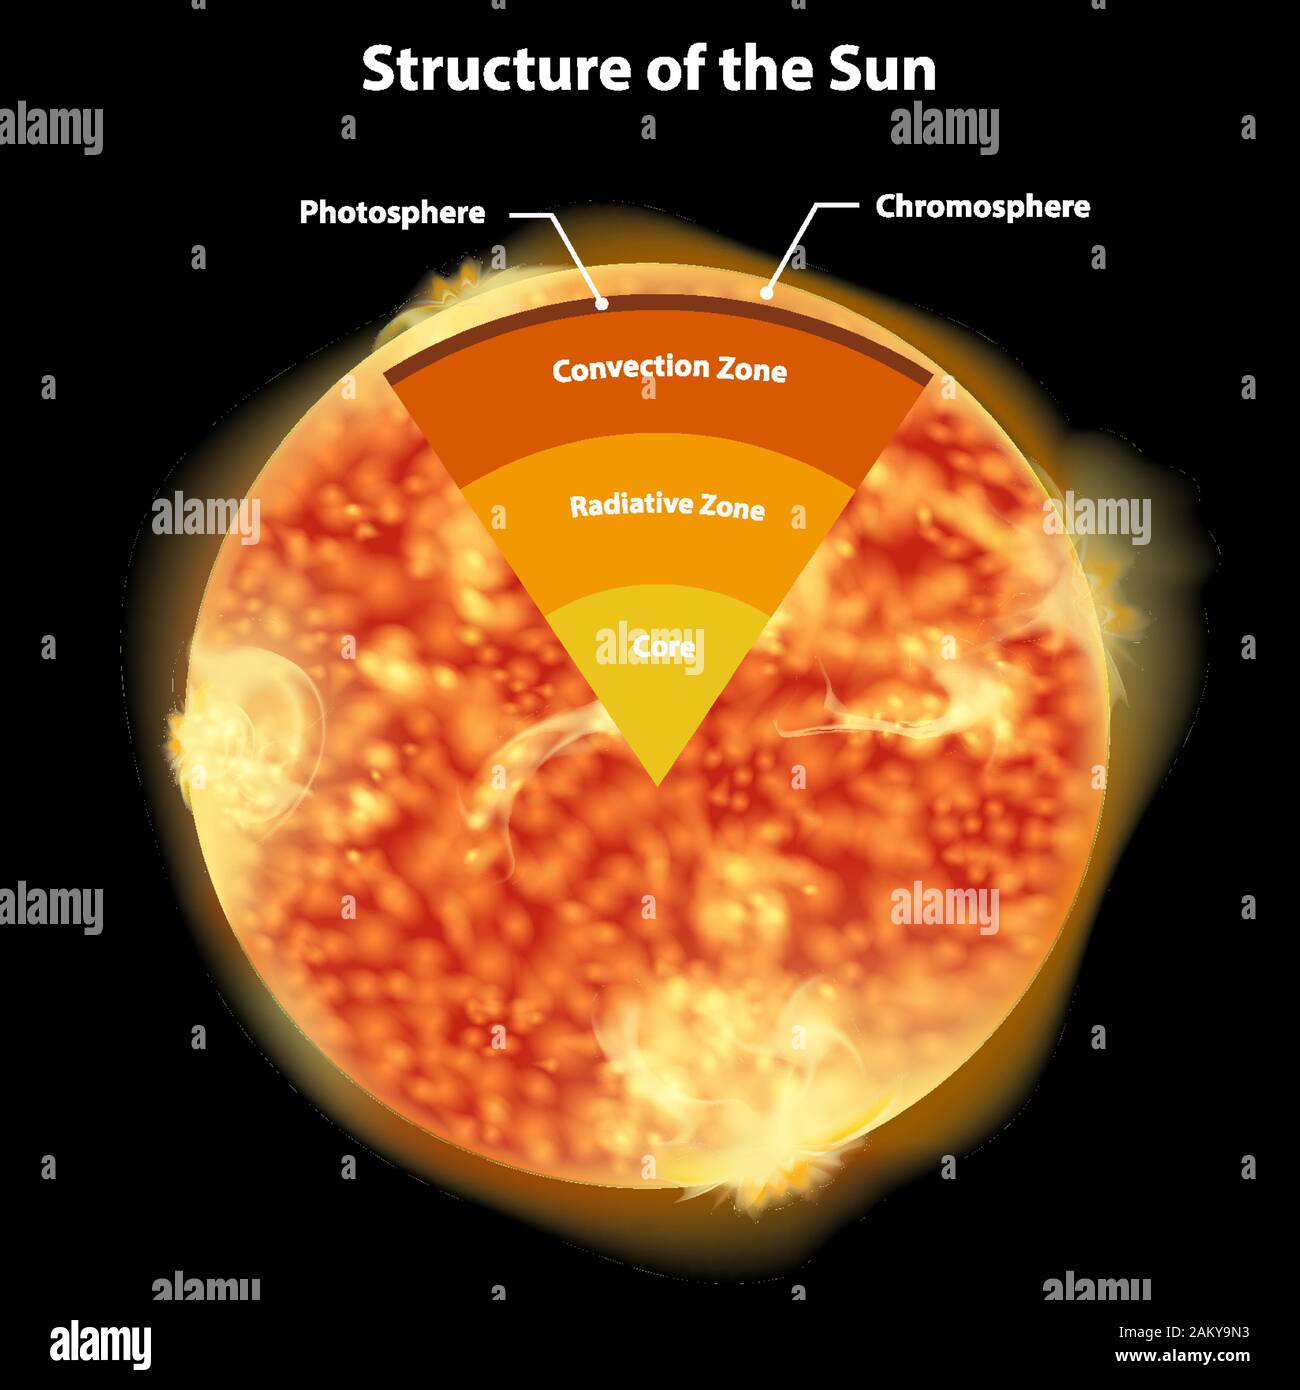 layers of the sun labeled